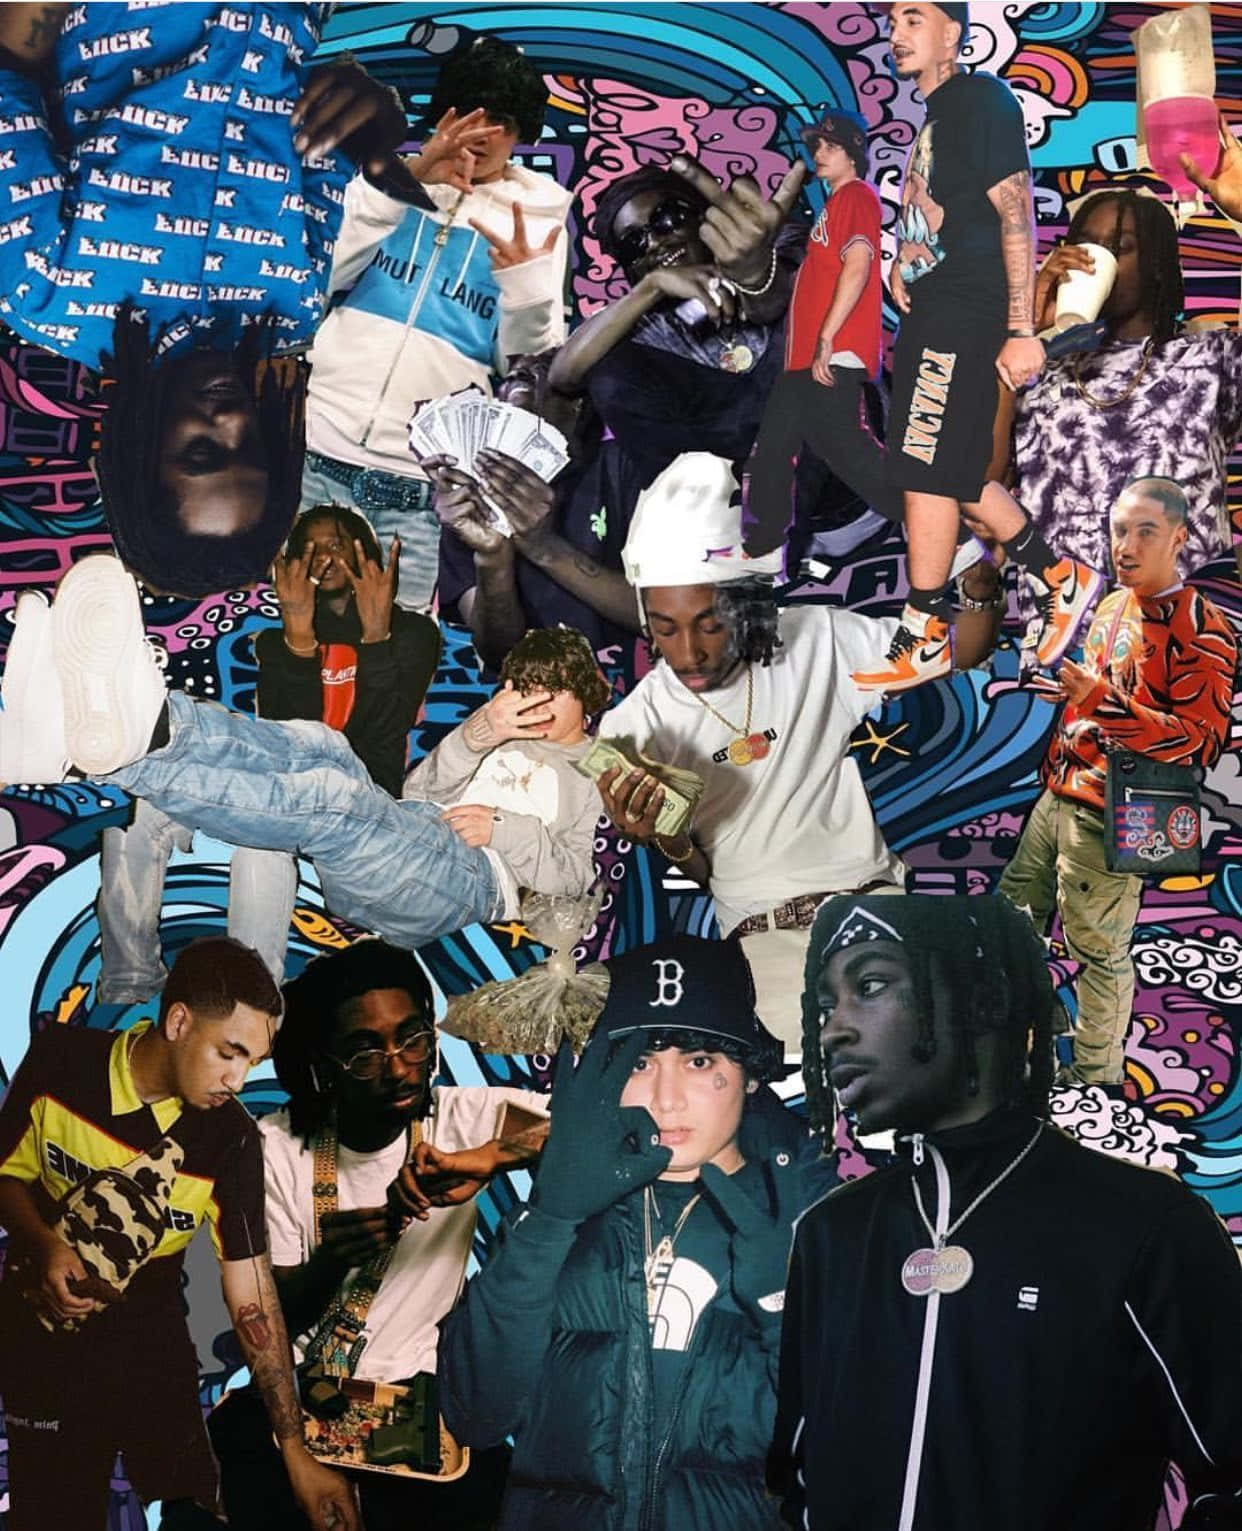 A Collage Of People In Various Styles Of Clothing Wallpaper